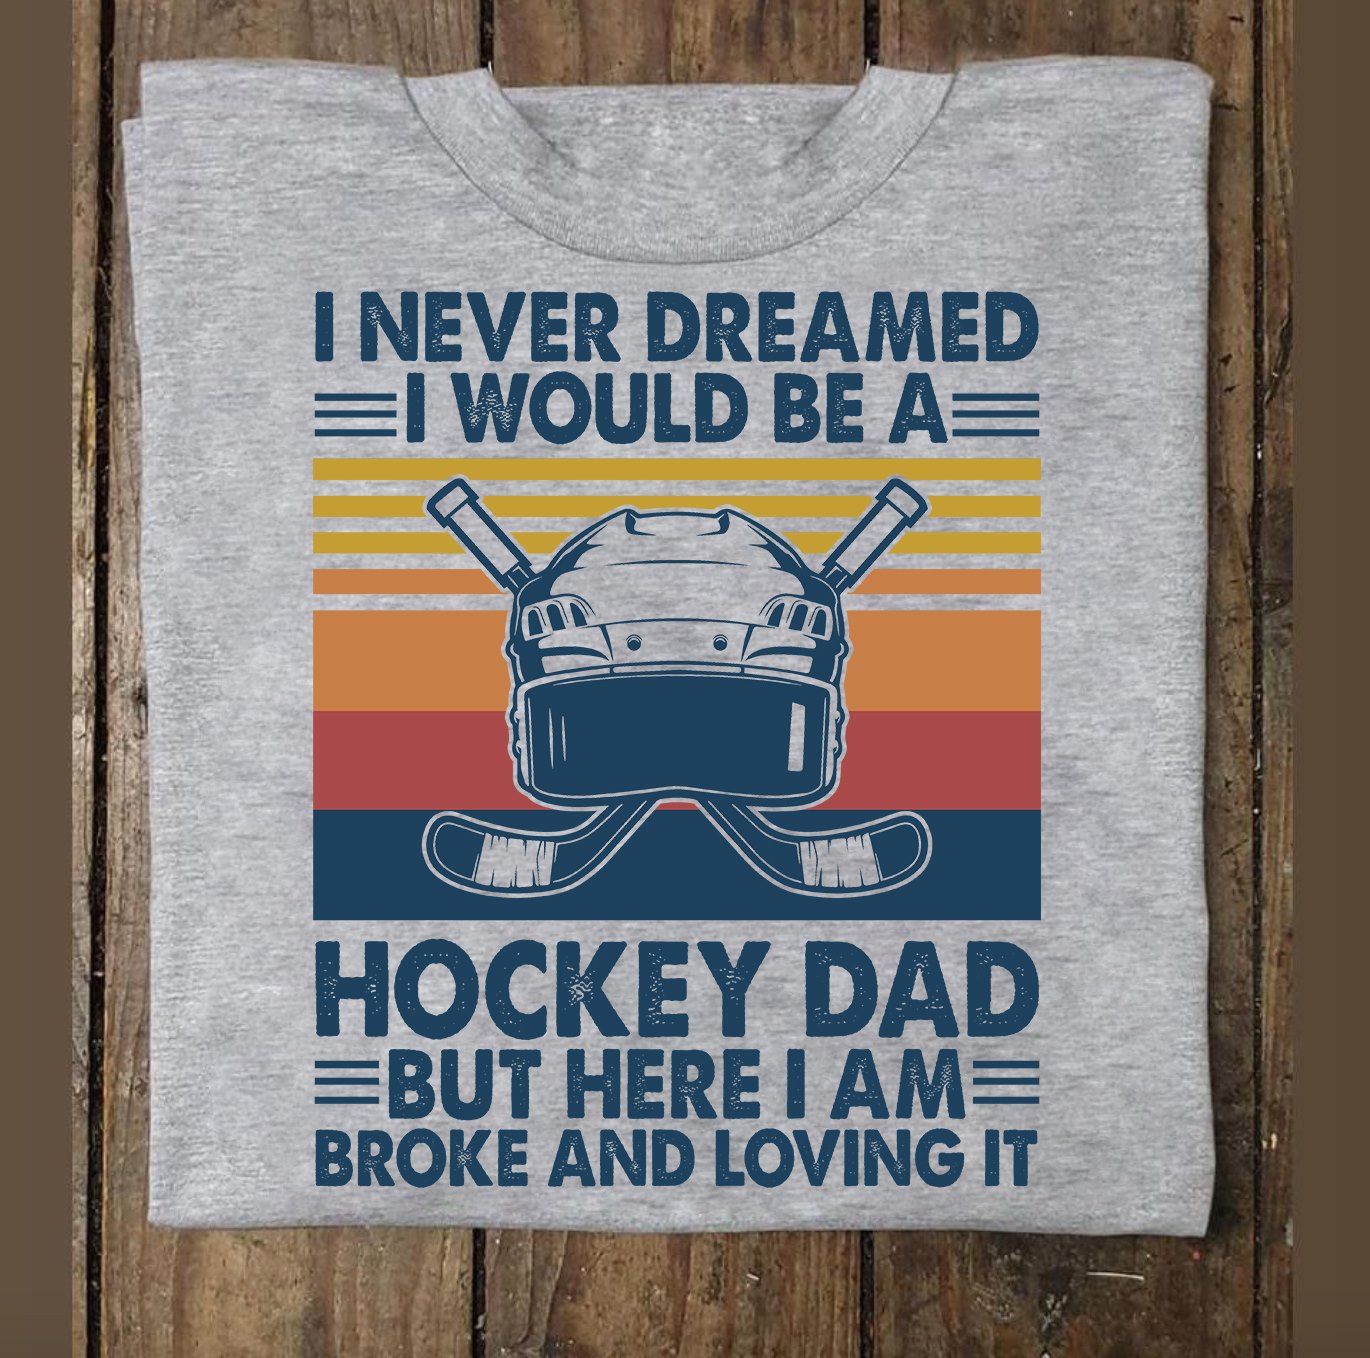 I never dreamed I would be a hockey dad but here i am broke and loving it